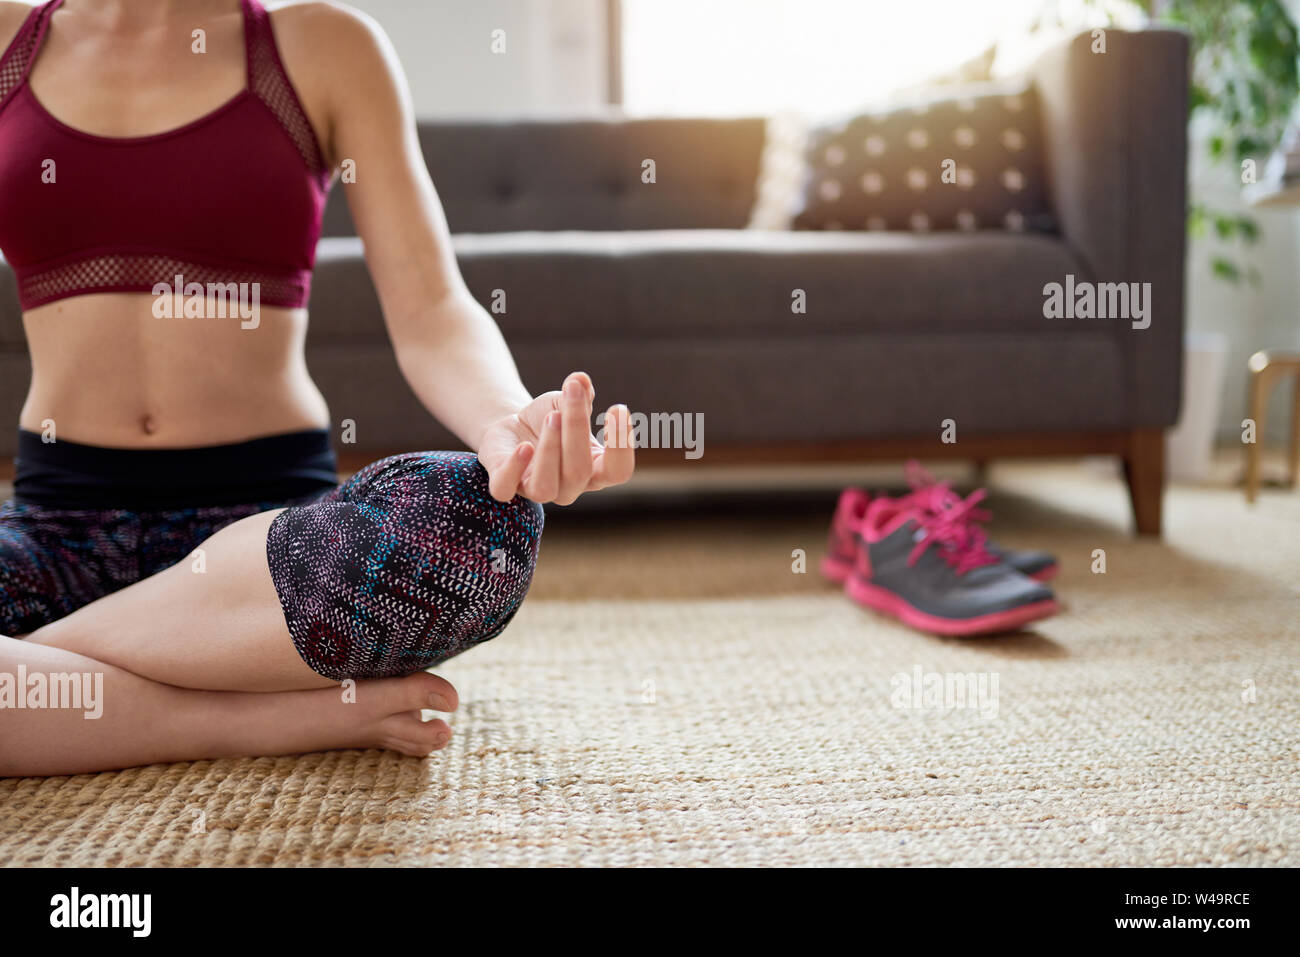 Trendy woman doing yoga as part of her mindfulness morning routine Stock Photo